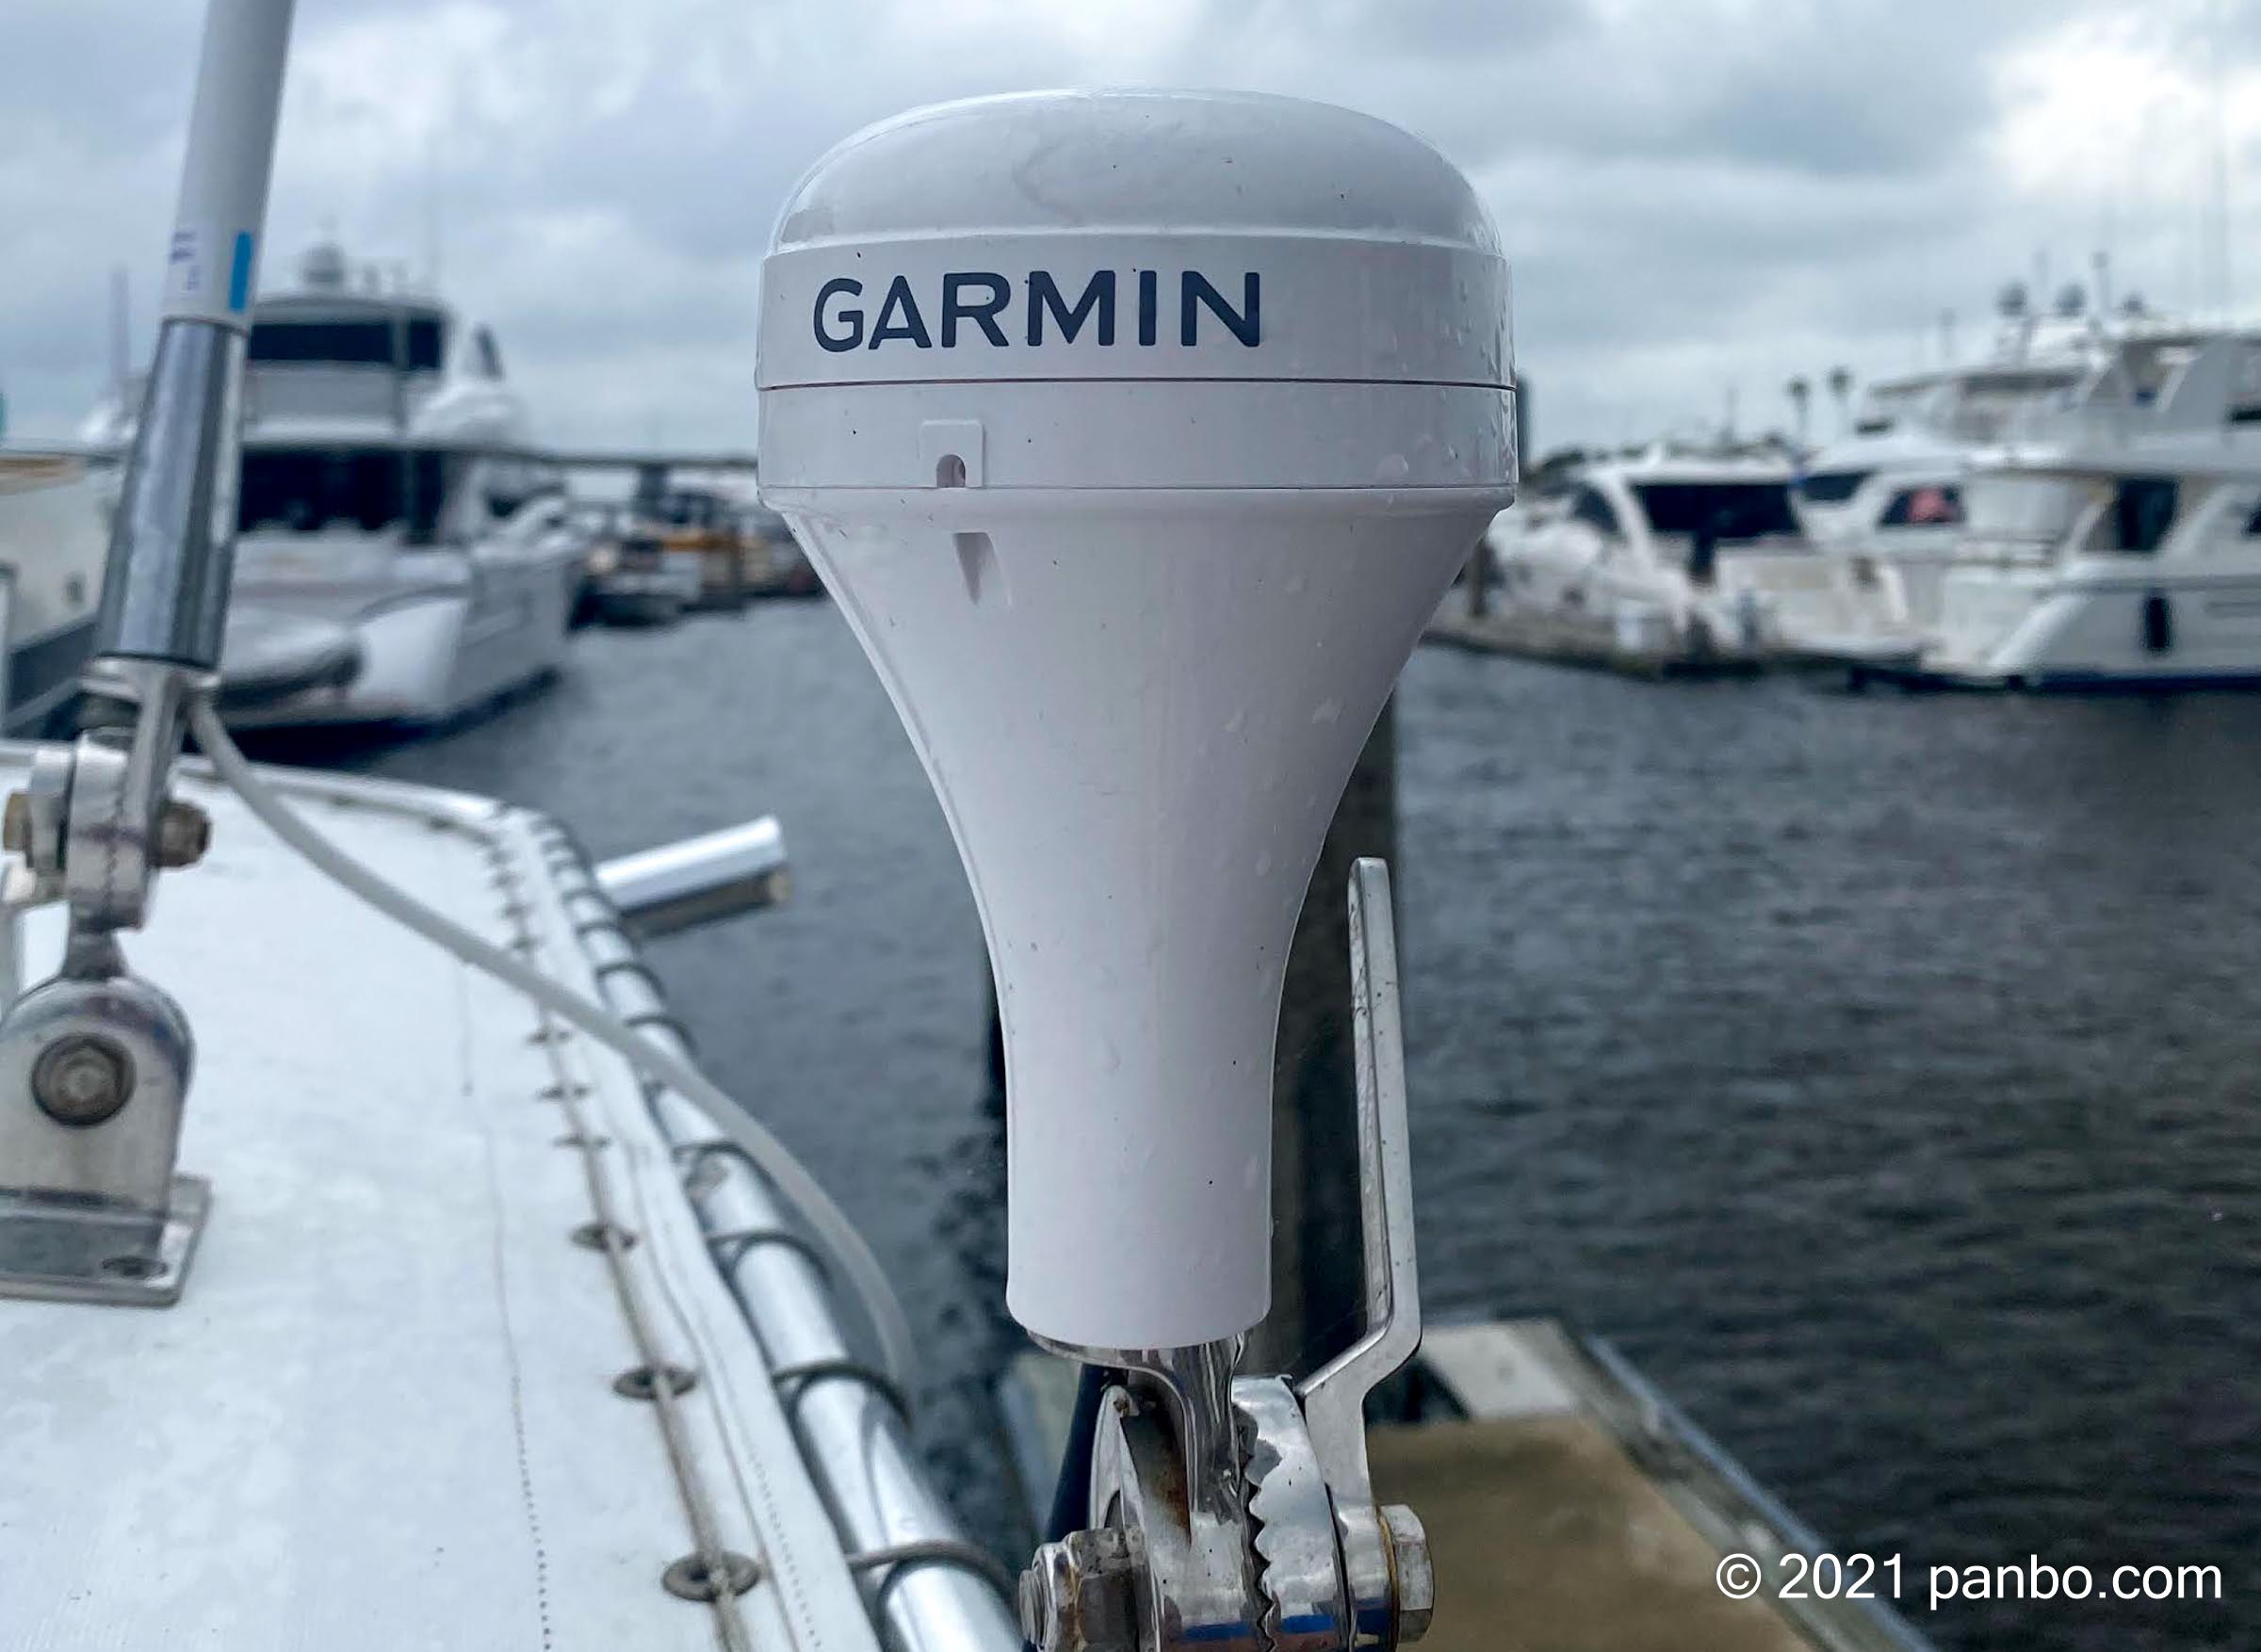 Garmin GPS 24xd: inexpensive Heading data to stabilize charts